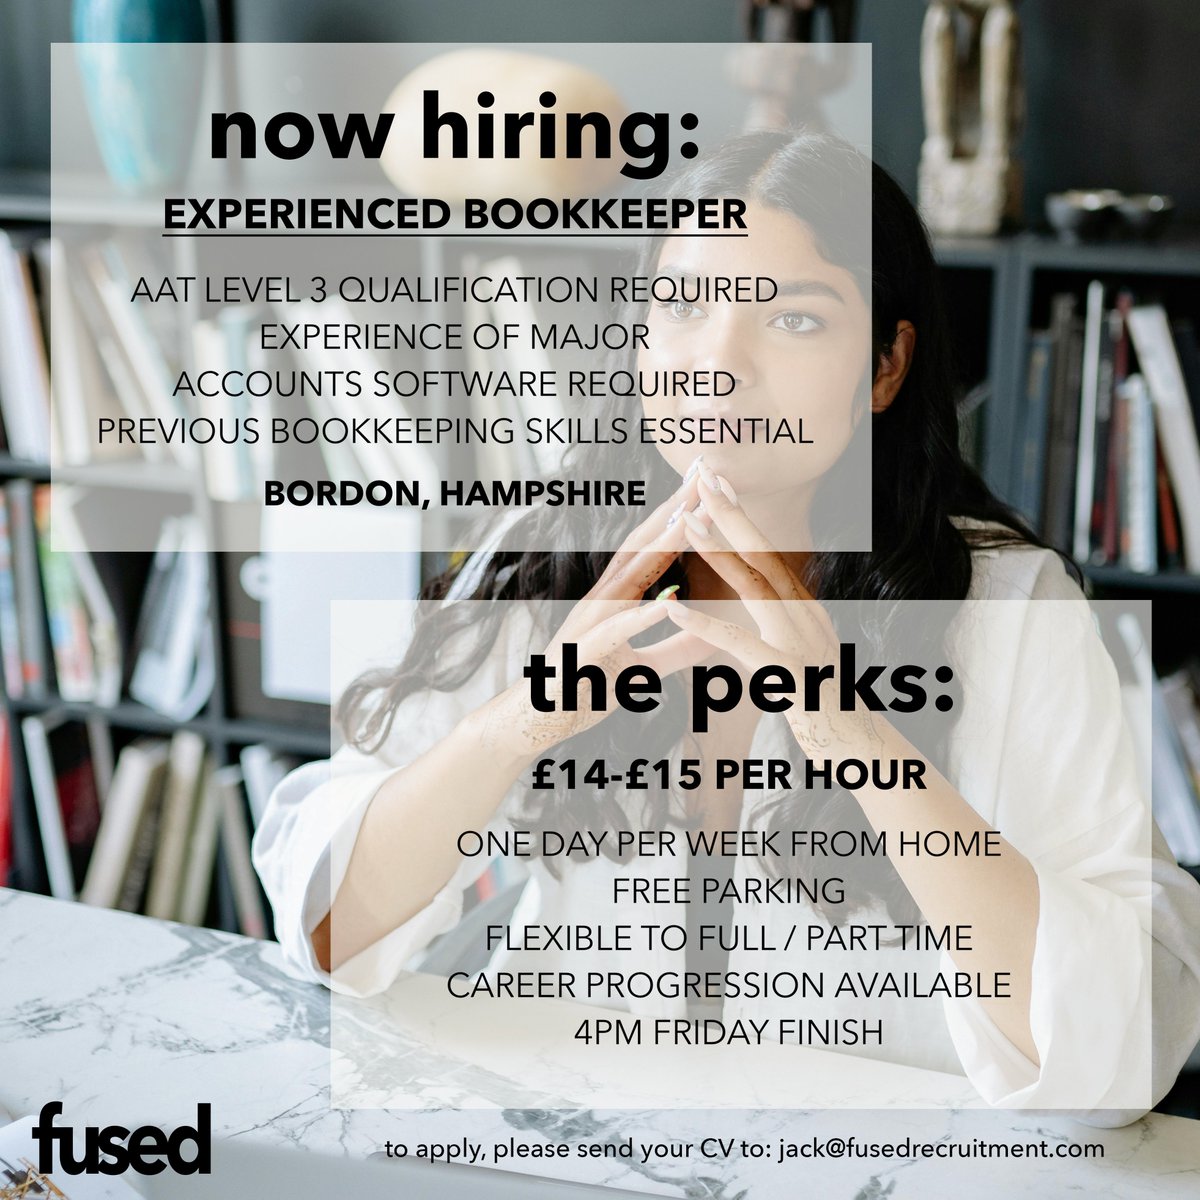 We're hiring for an experienced Bookkeeper to join our client in Bordon, Hampshire - an established Accountancy practice. Looking for your next Bookkeeping role? Look no further! #financejobs #bookkeepingjobs #bordon #hiring #aatlevel3